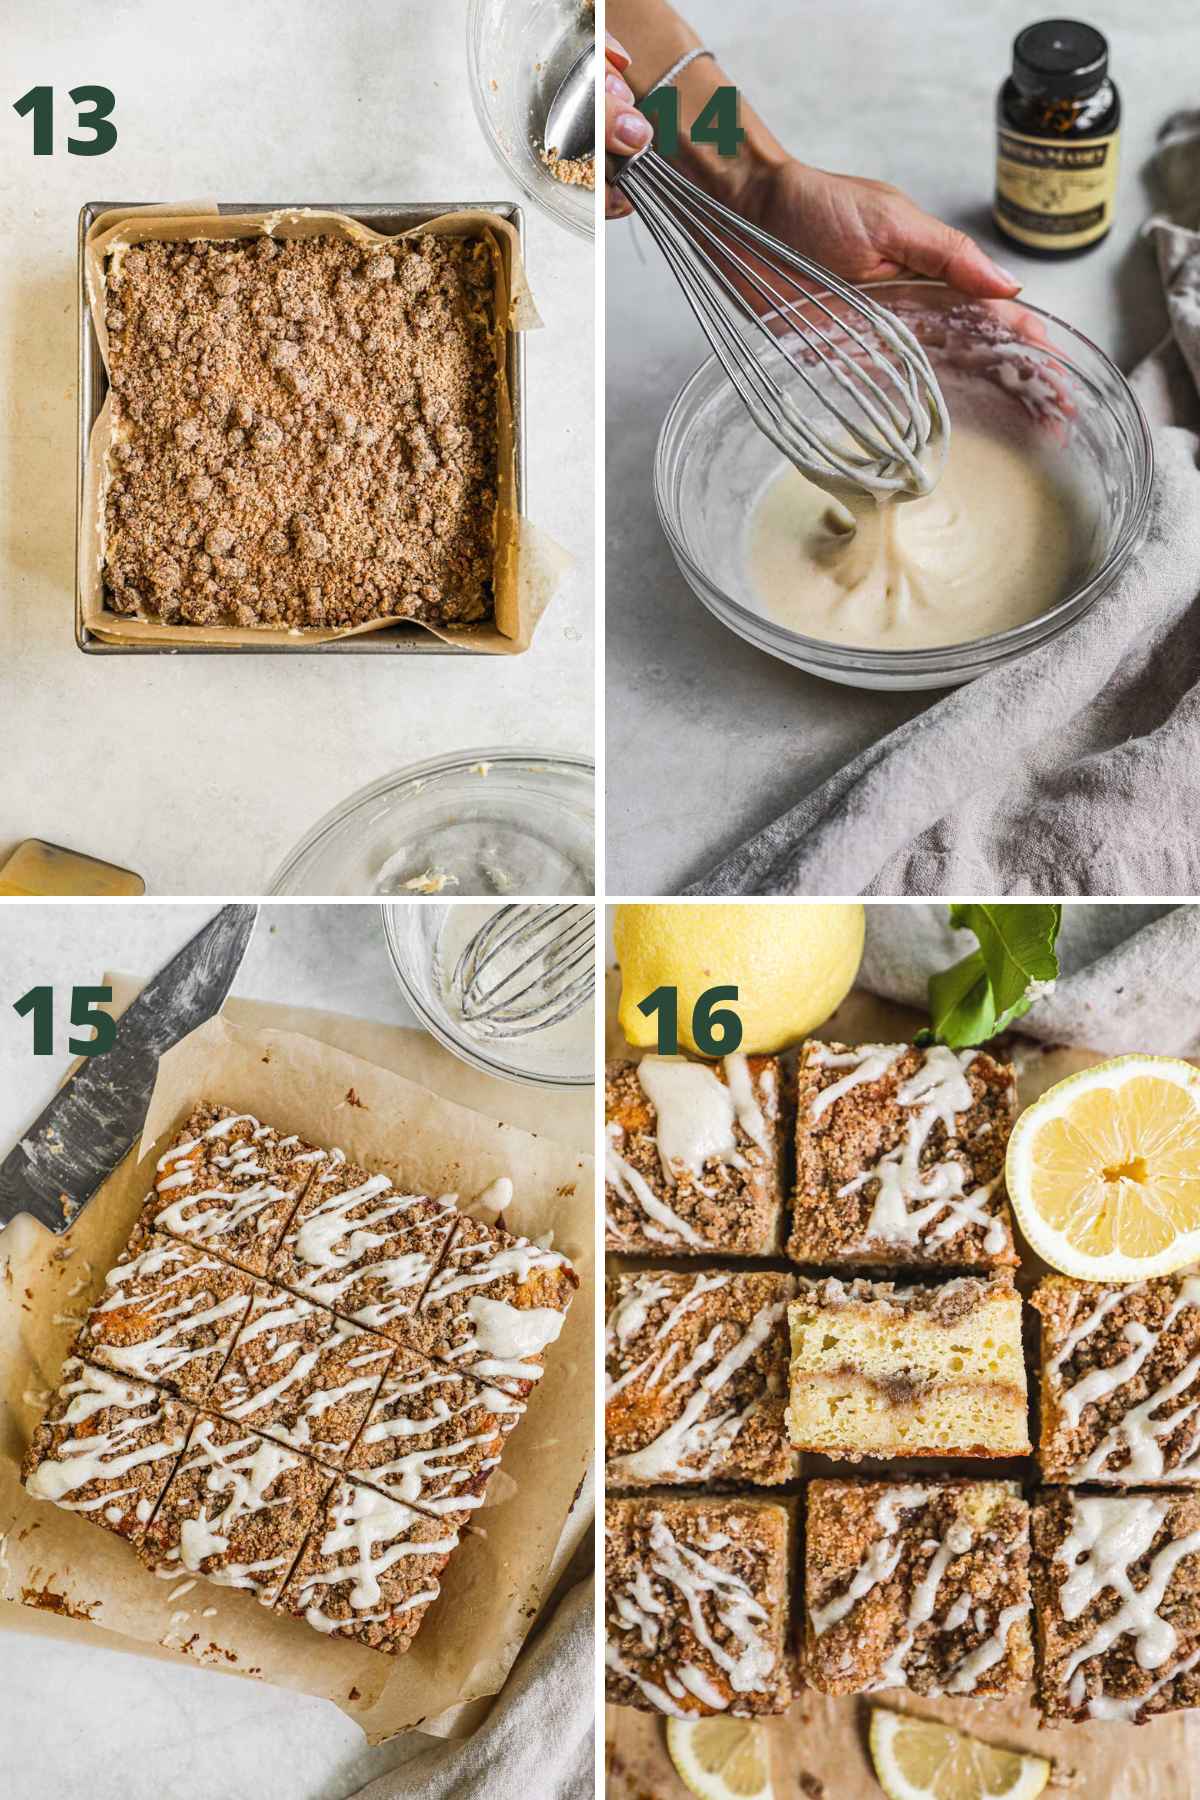 Steps to make lemon curd coffee cake, sprinkle rest of streusel and bake, whisk vanilla bean glaze, remove cake from oven, drizzle glaze, slice, and serve.